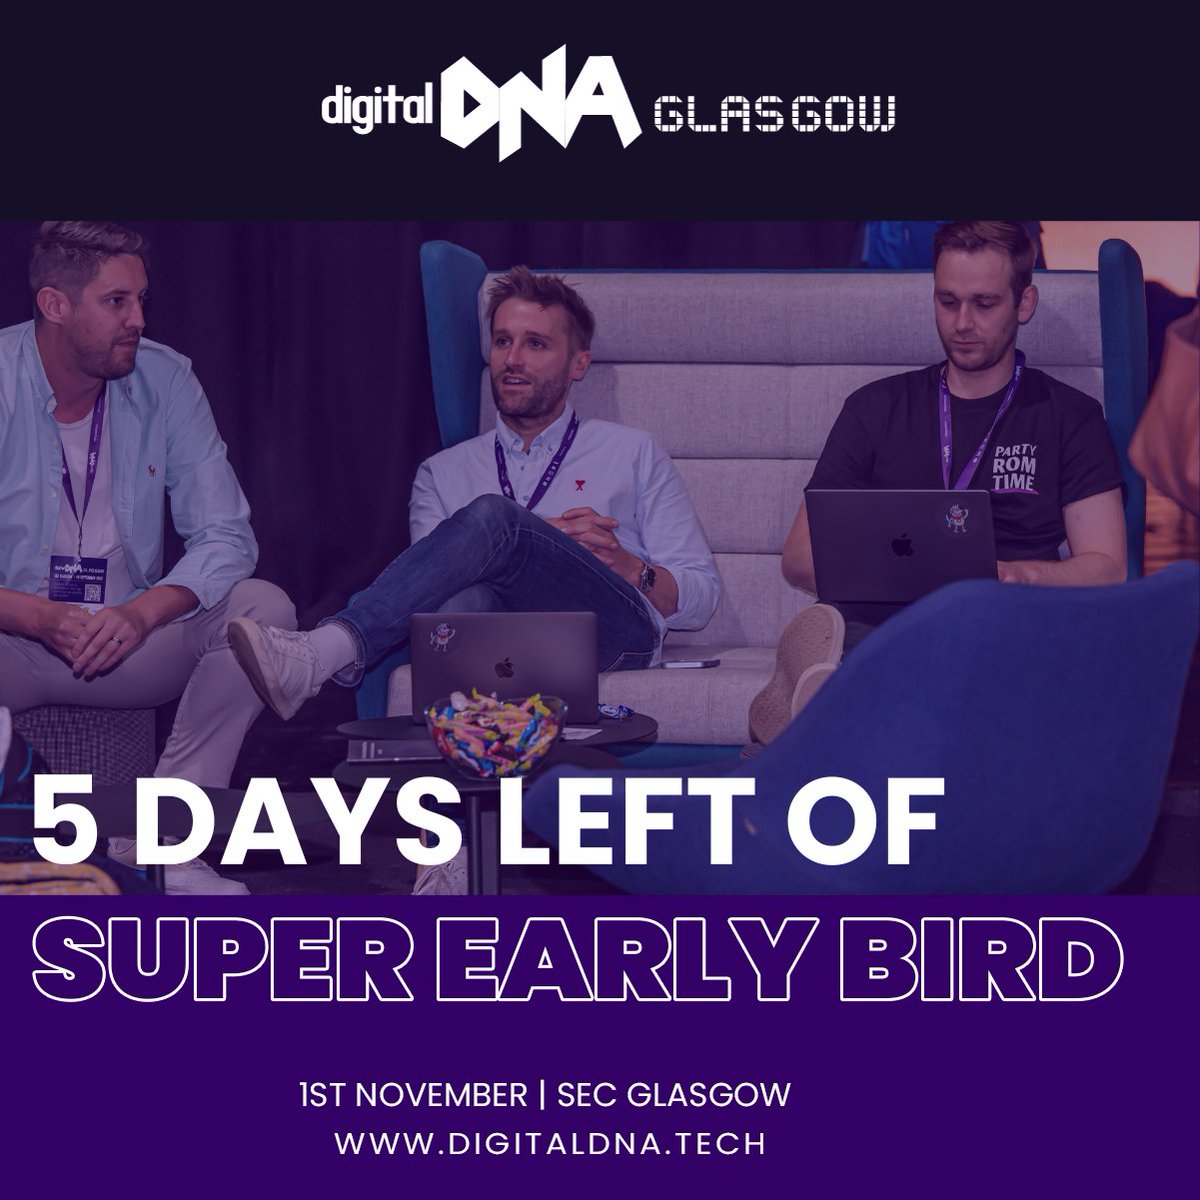 5 days left of Super Early Bird Discount! 📢 Don't miss out on this amazing opportunity to connect with industry leaders and stay ahead of the digital game. Get your tickets now at ti.to/digital-dna/di… #DigitalDNAGlasgow #SuperEarlyBird #LimitedTimeOffer